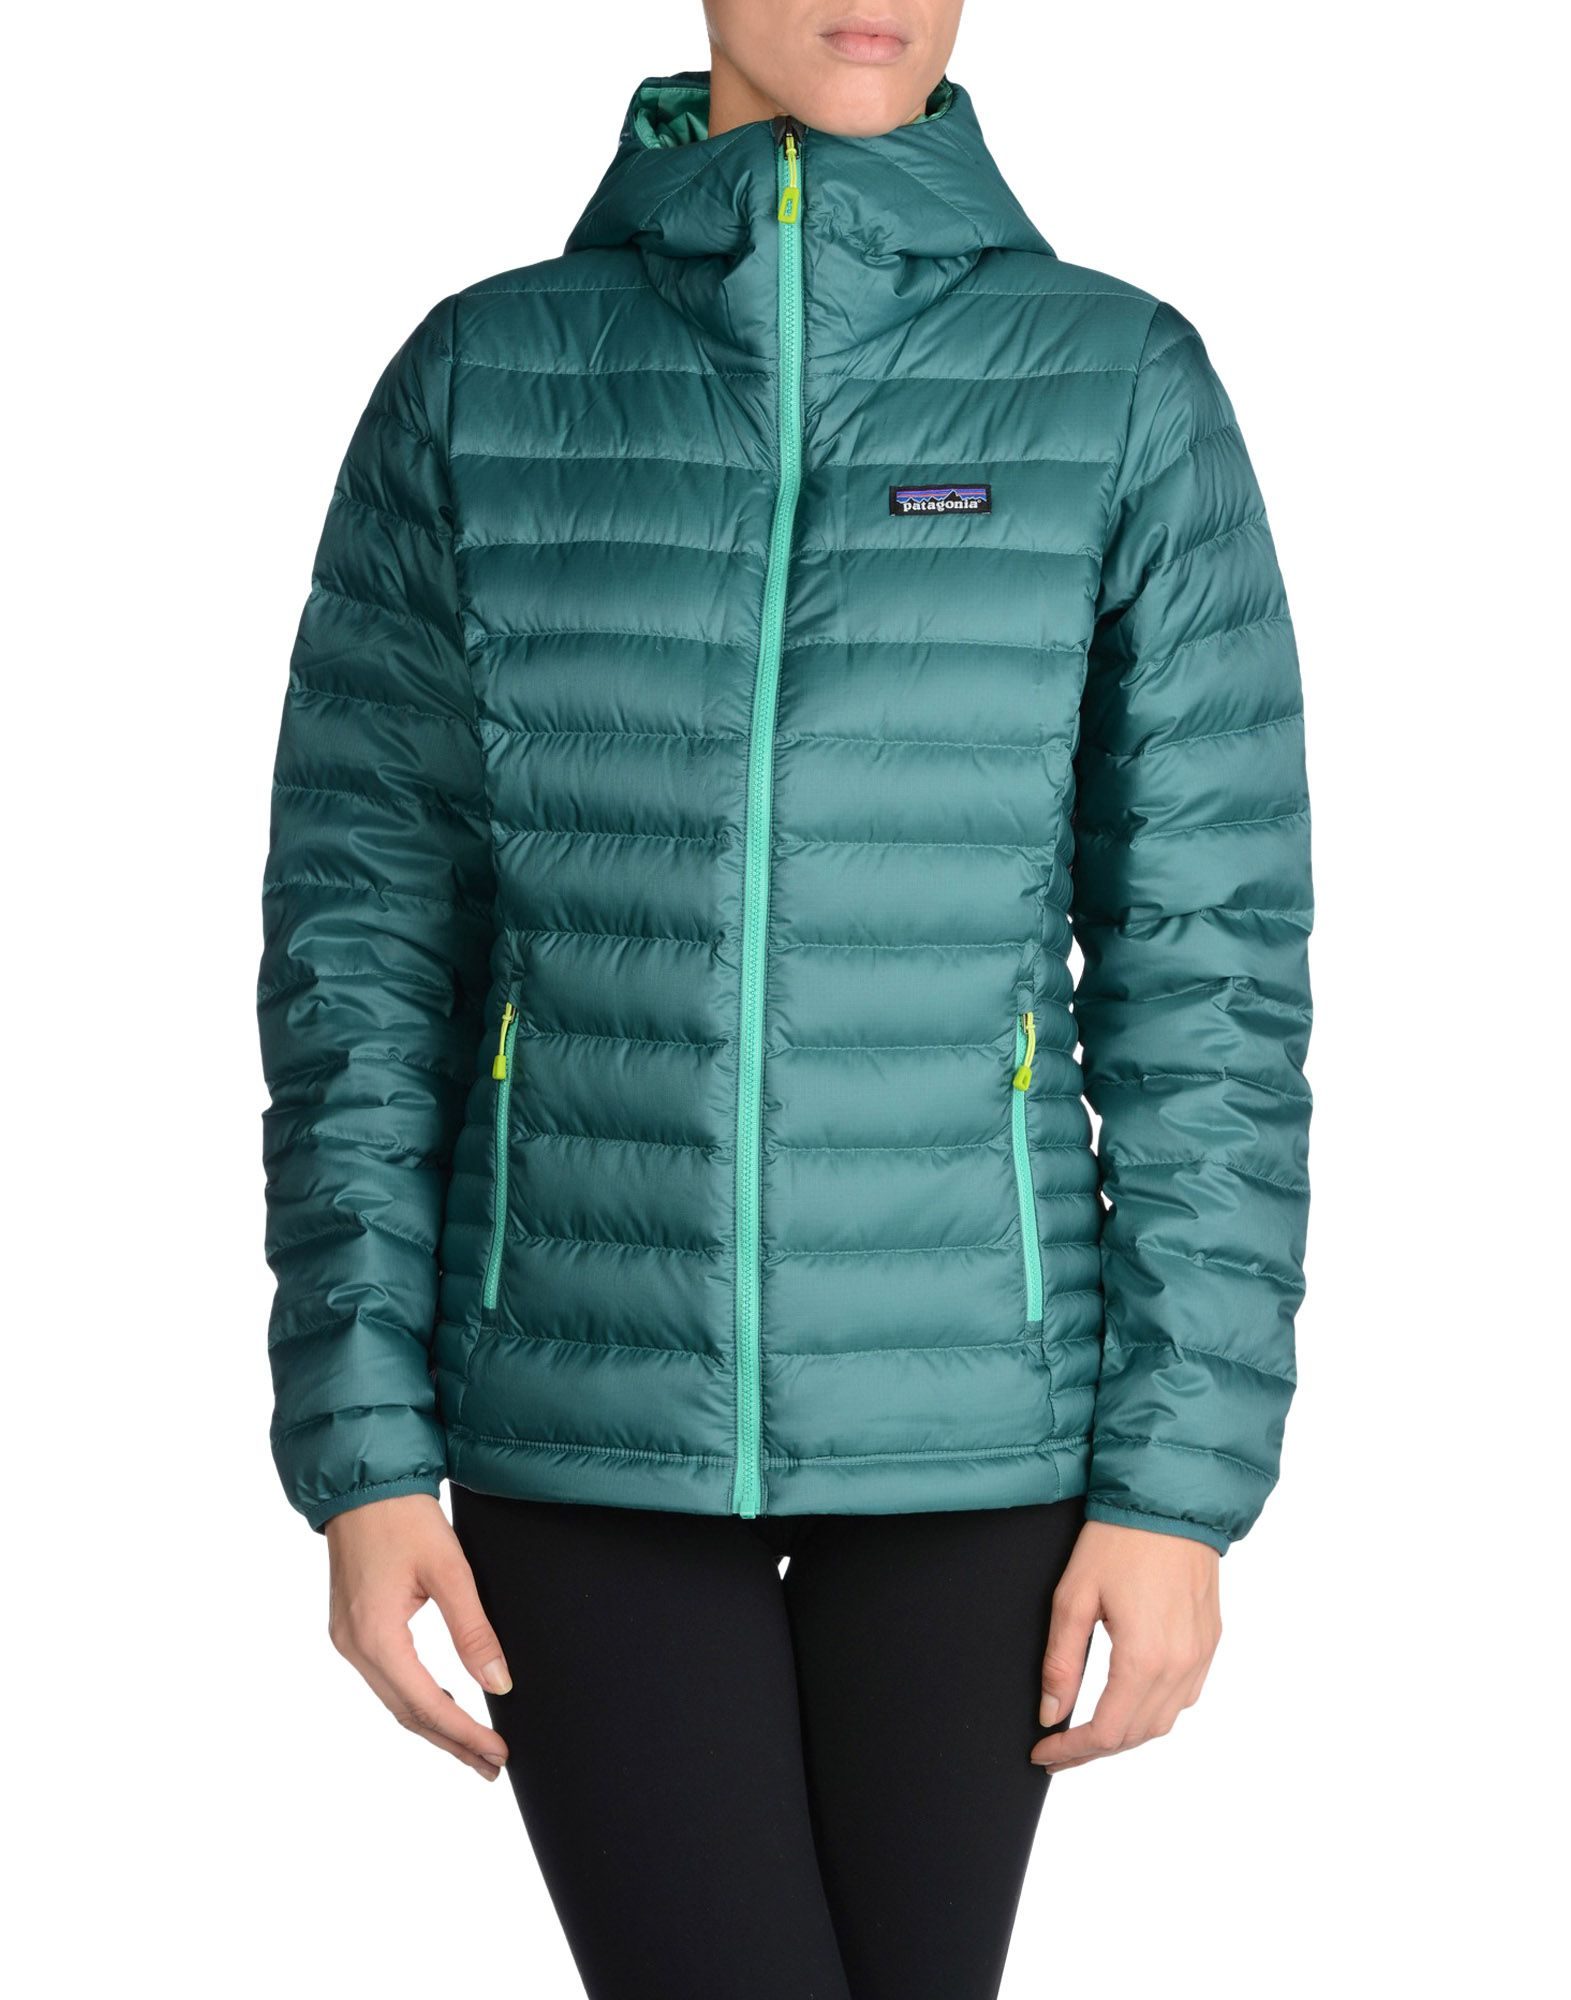 Lyst - Patagonia Down Jacket in Green